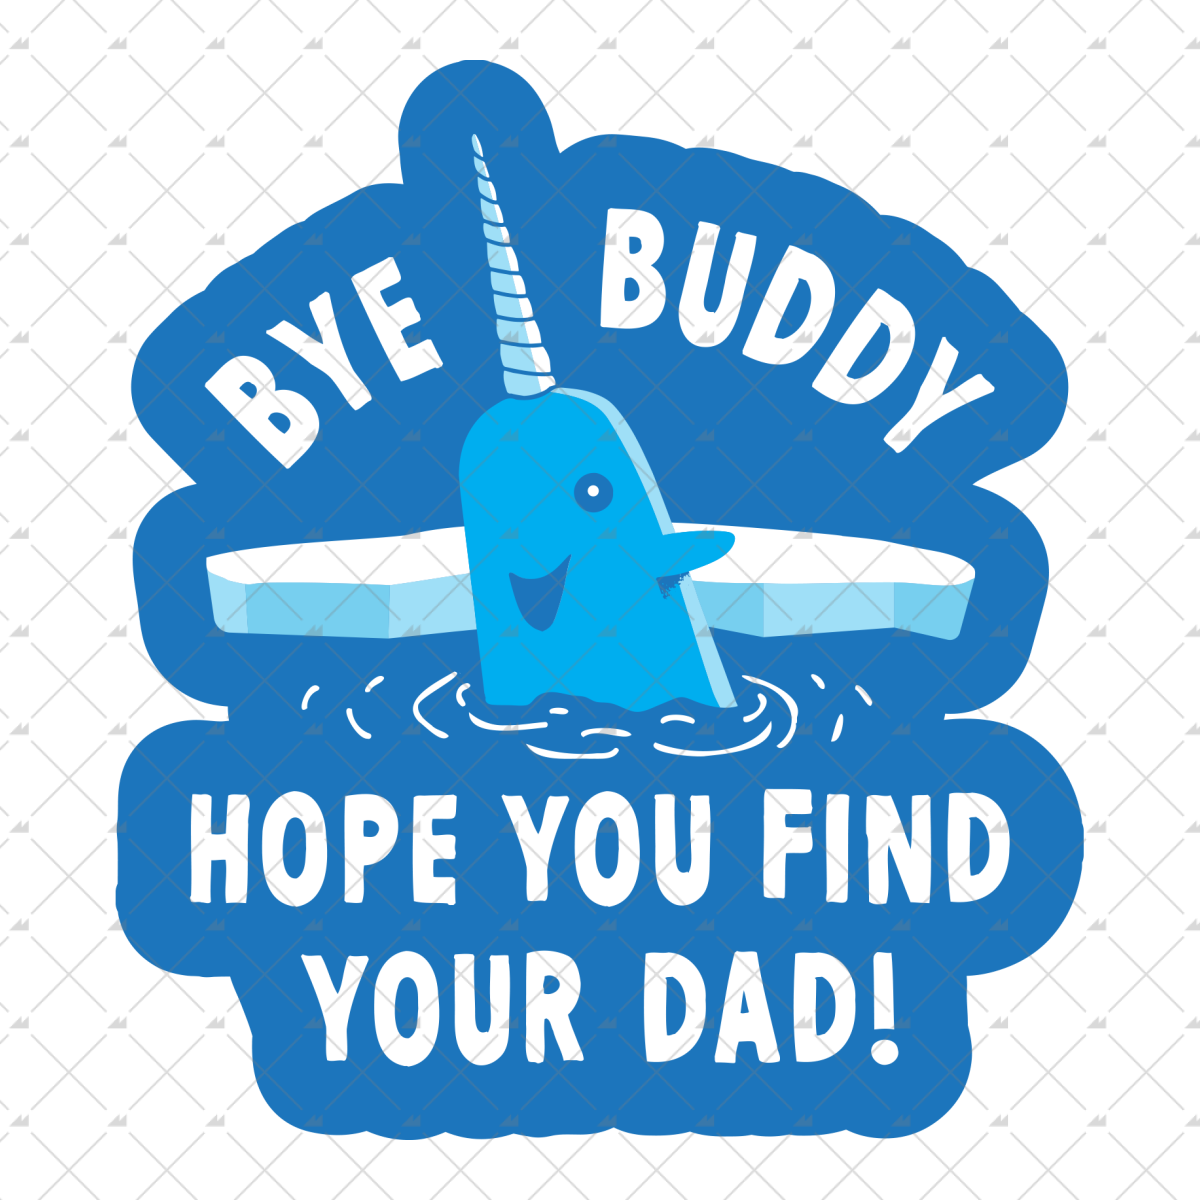 Bye Buddy Hope You Find Your Dad - Sticker